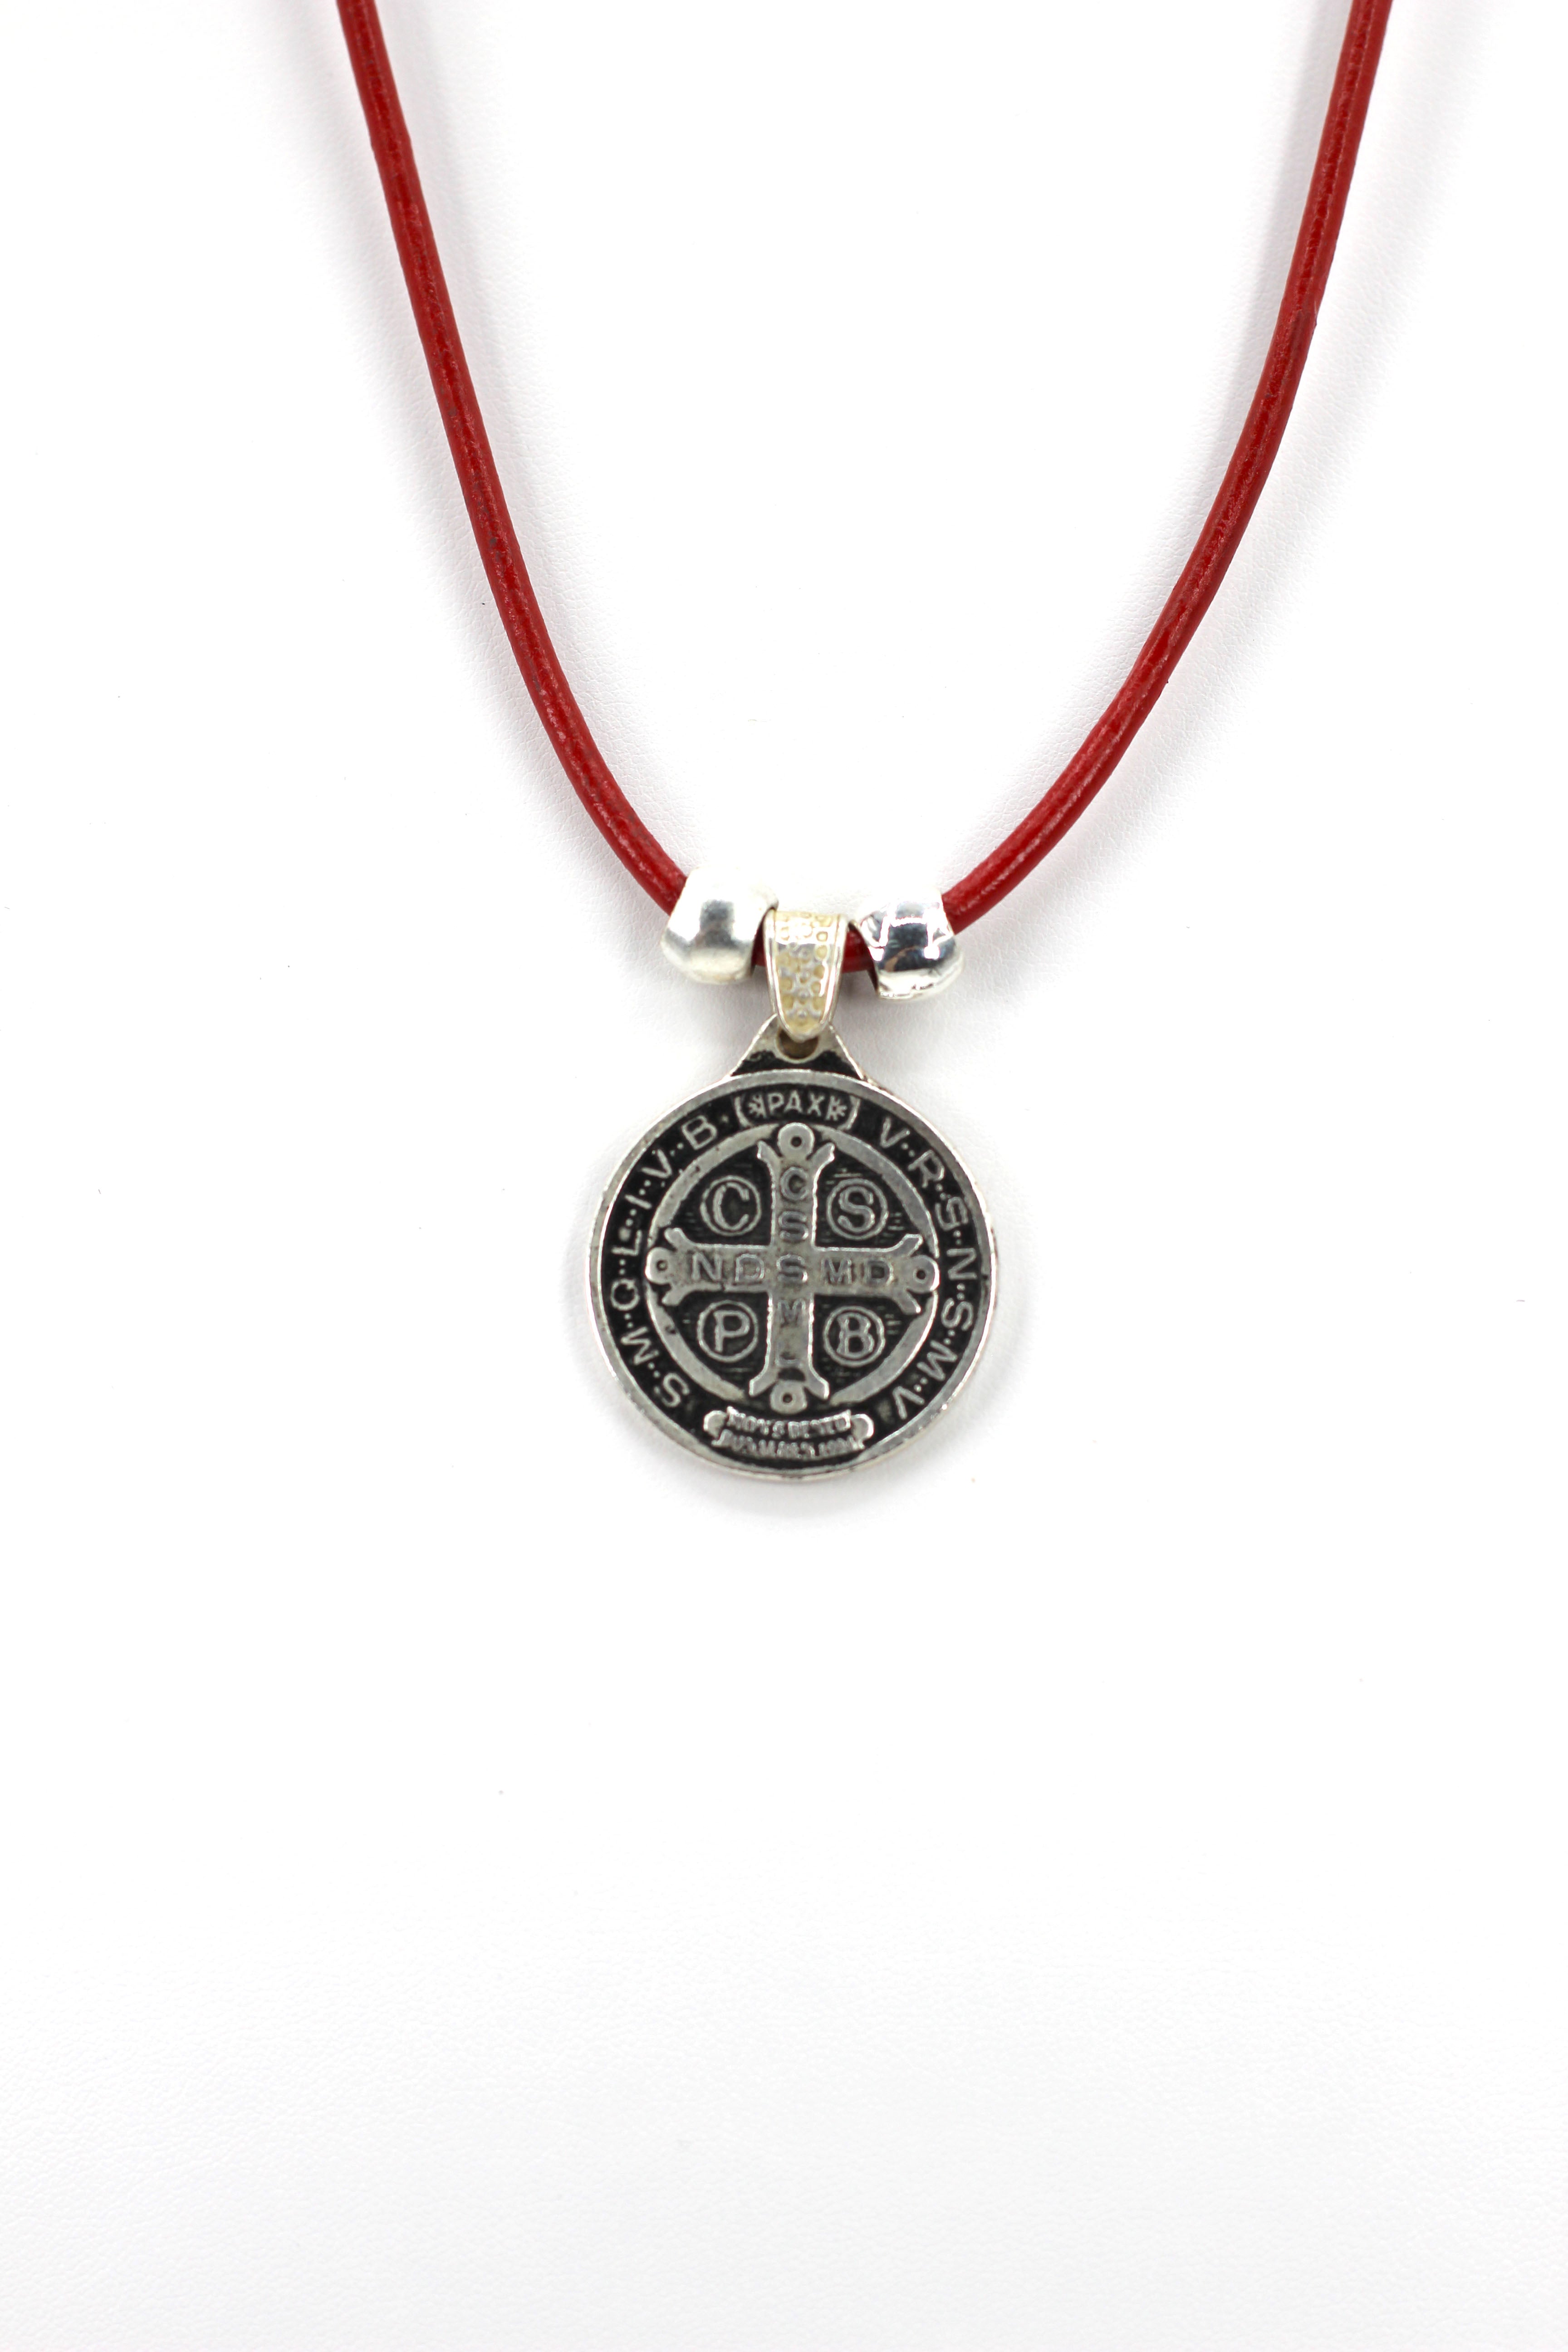 Vintage Necklace of Saint Benedict Handmade Jewelry with Genuine Leather and Reversible strap by Graciela's Collection